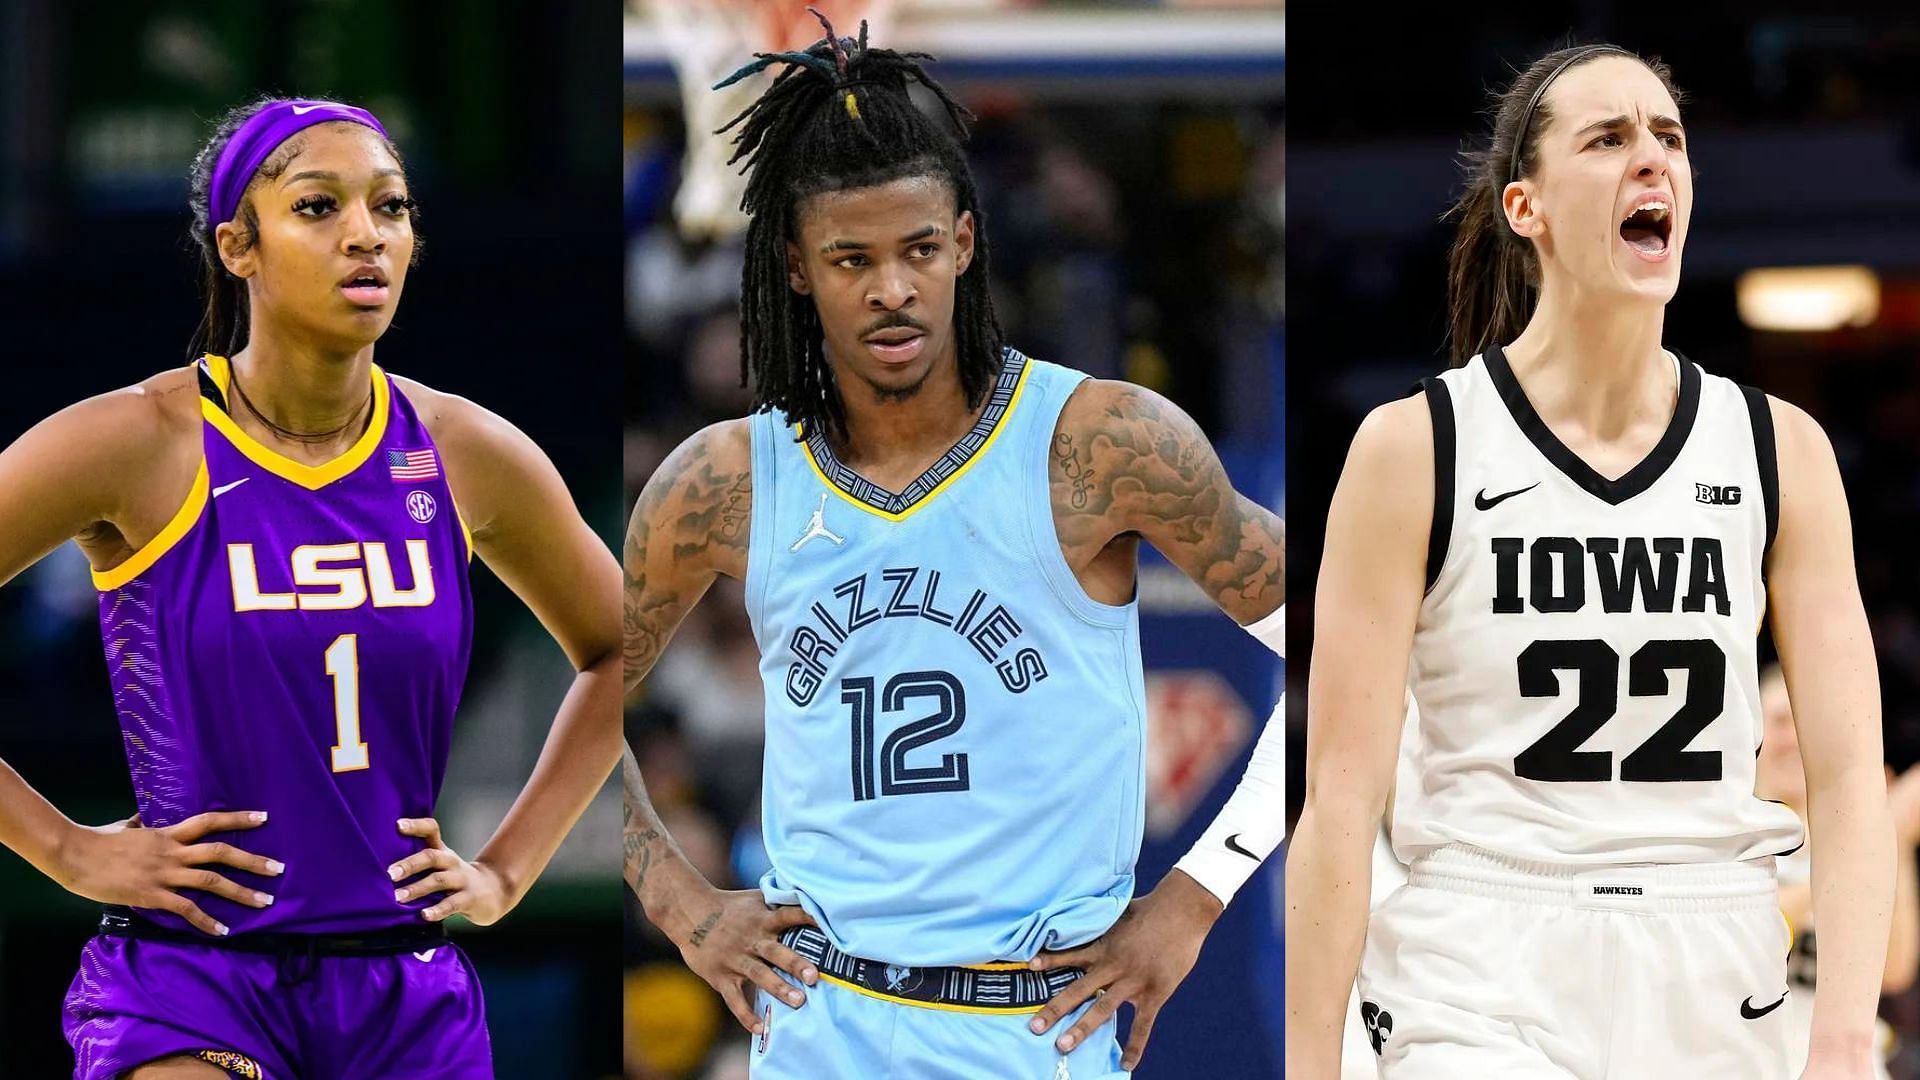 Caitlin Clark fans took shots at Angel Reese after she quoted Ja Morant.